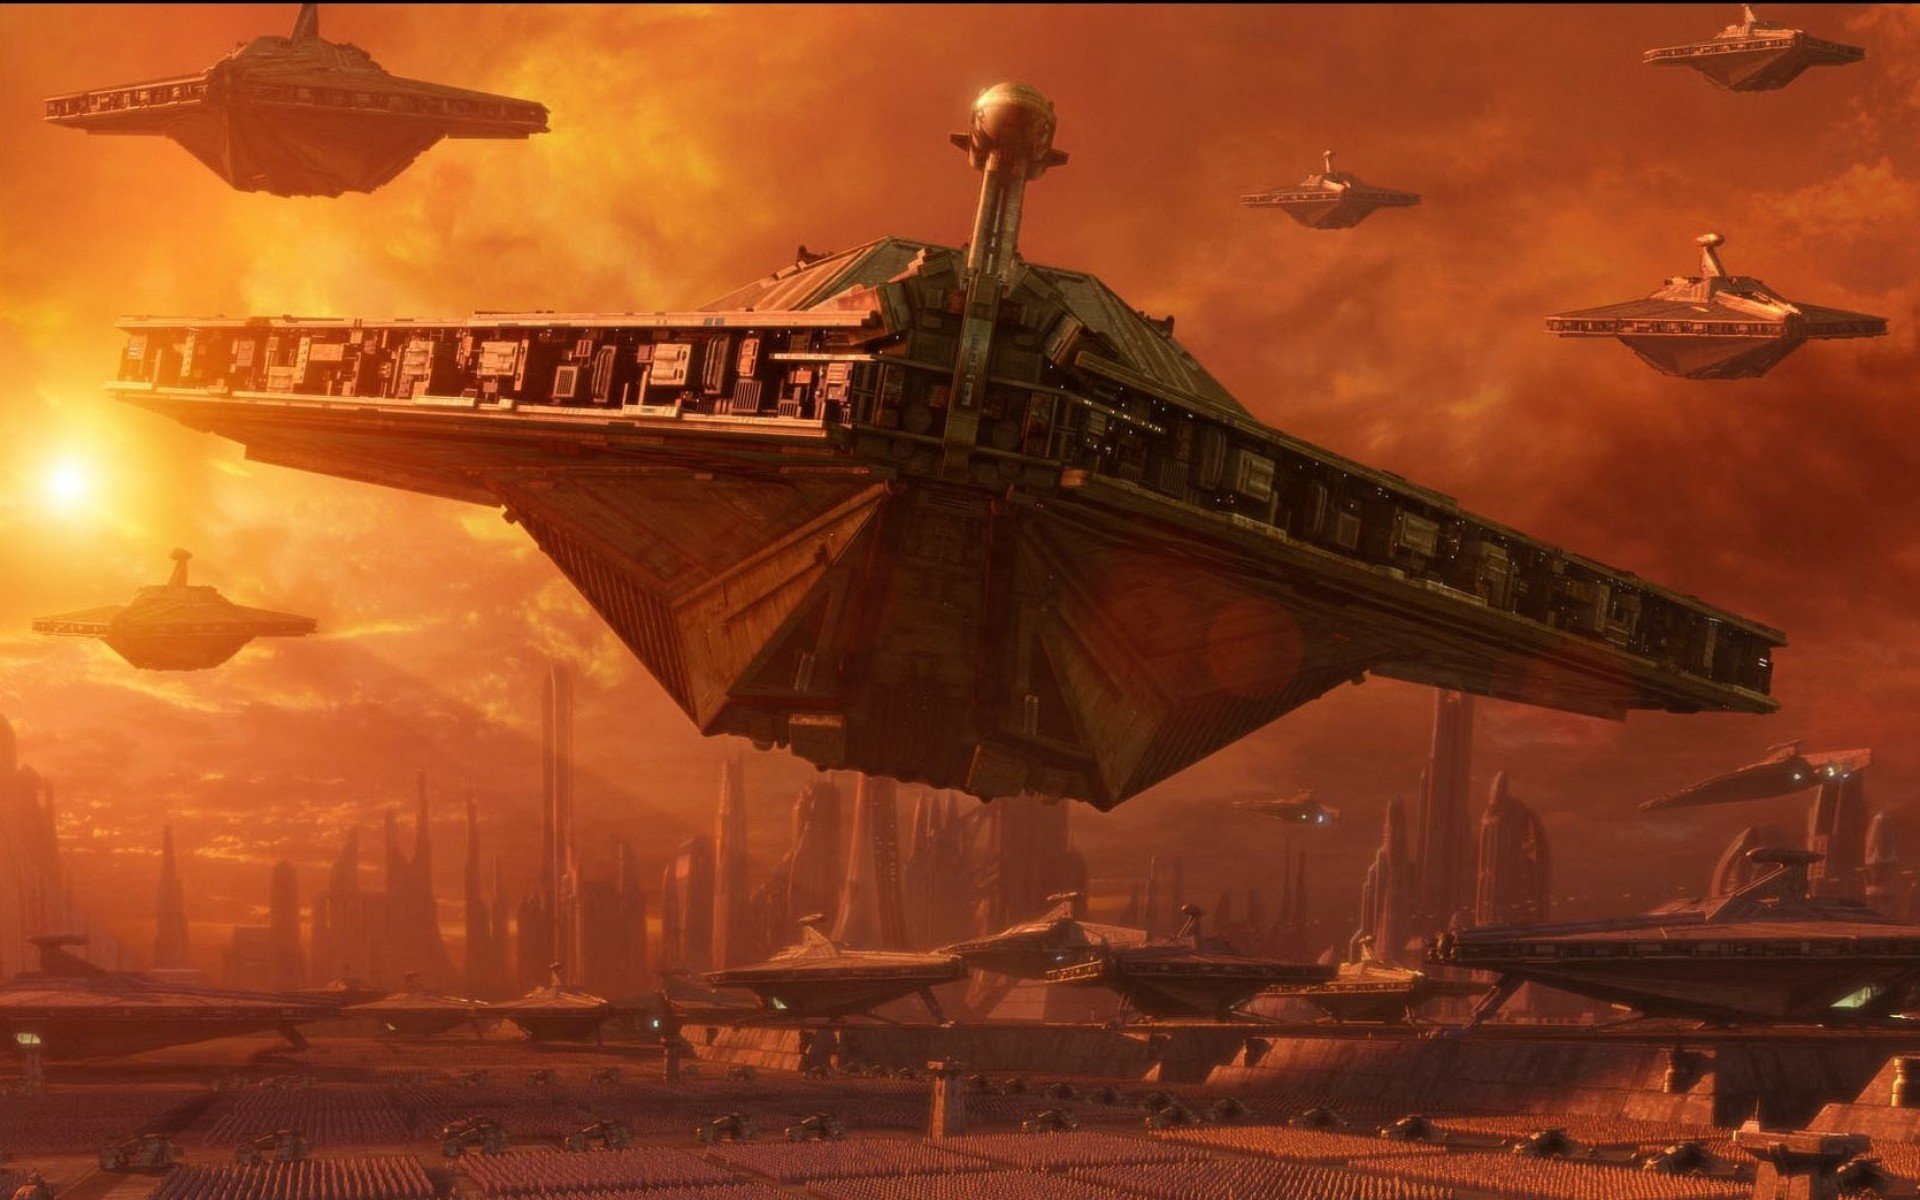 Best Star Wars Episode 2 (II): Attack Of The Clones background ID:194105 for High Resolution hd 1920x1200 desktop